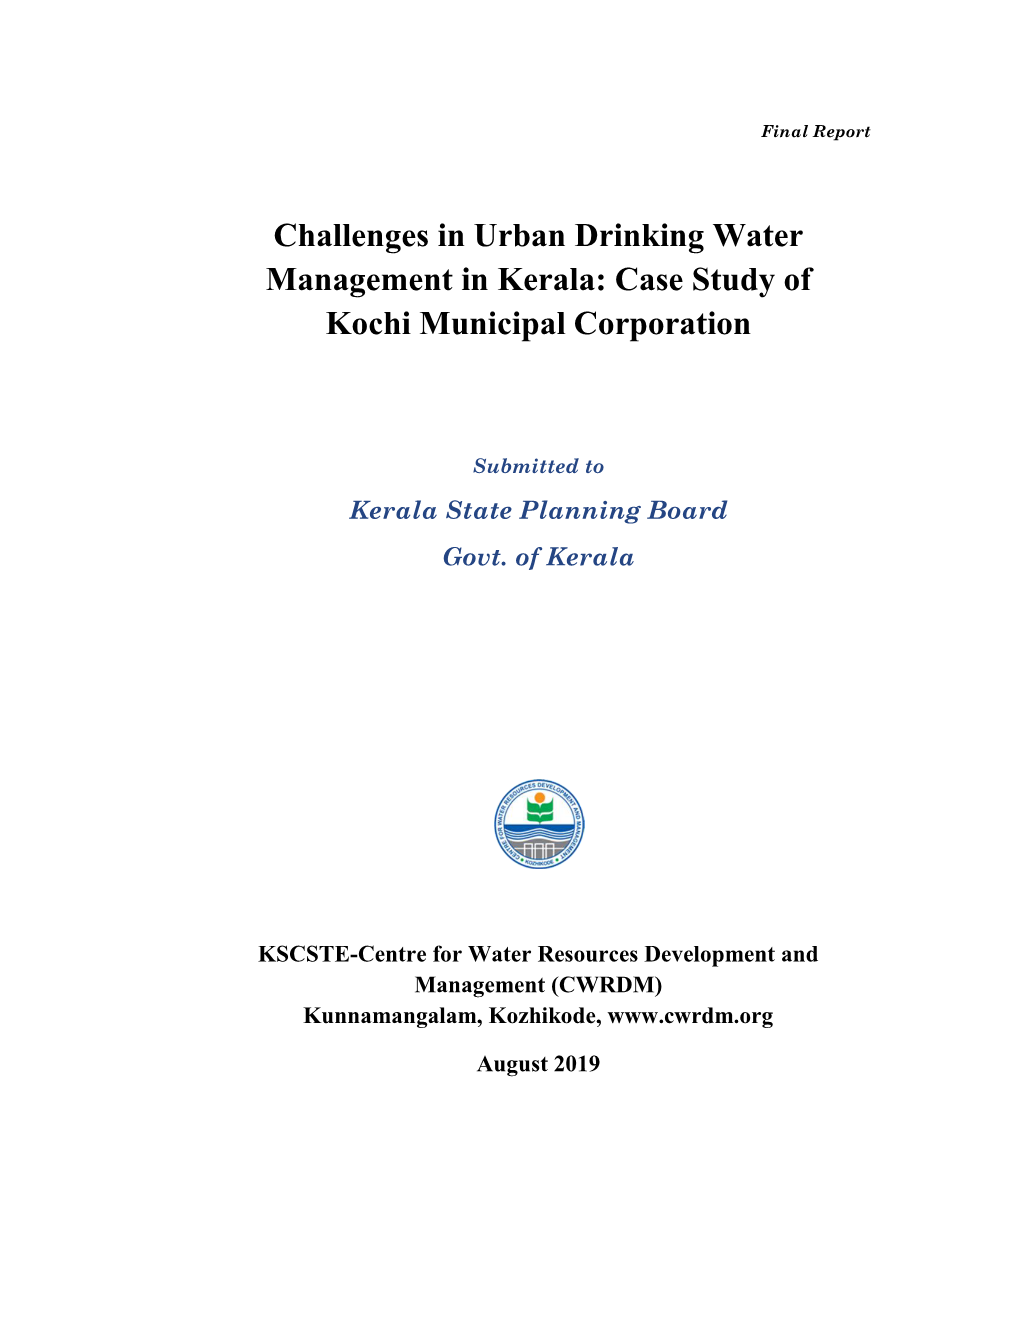 Challenges in Urban Drinking Water Management in Kerala: Case Study of Kochi Municipal Corporation